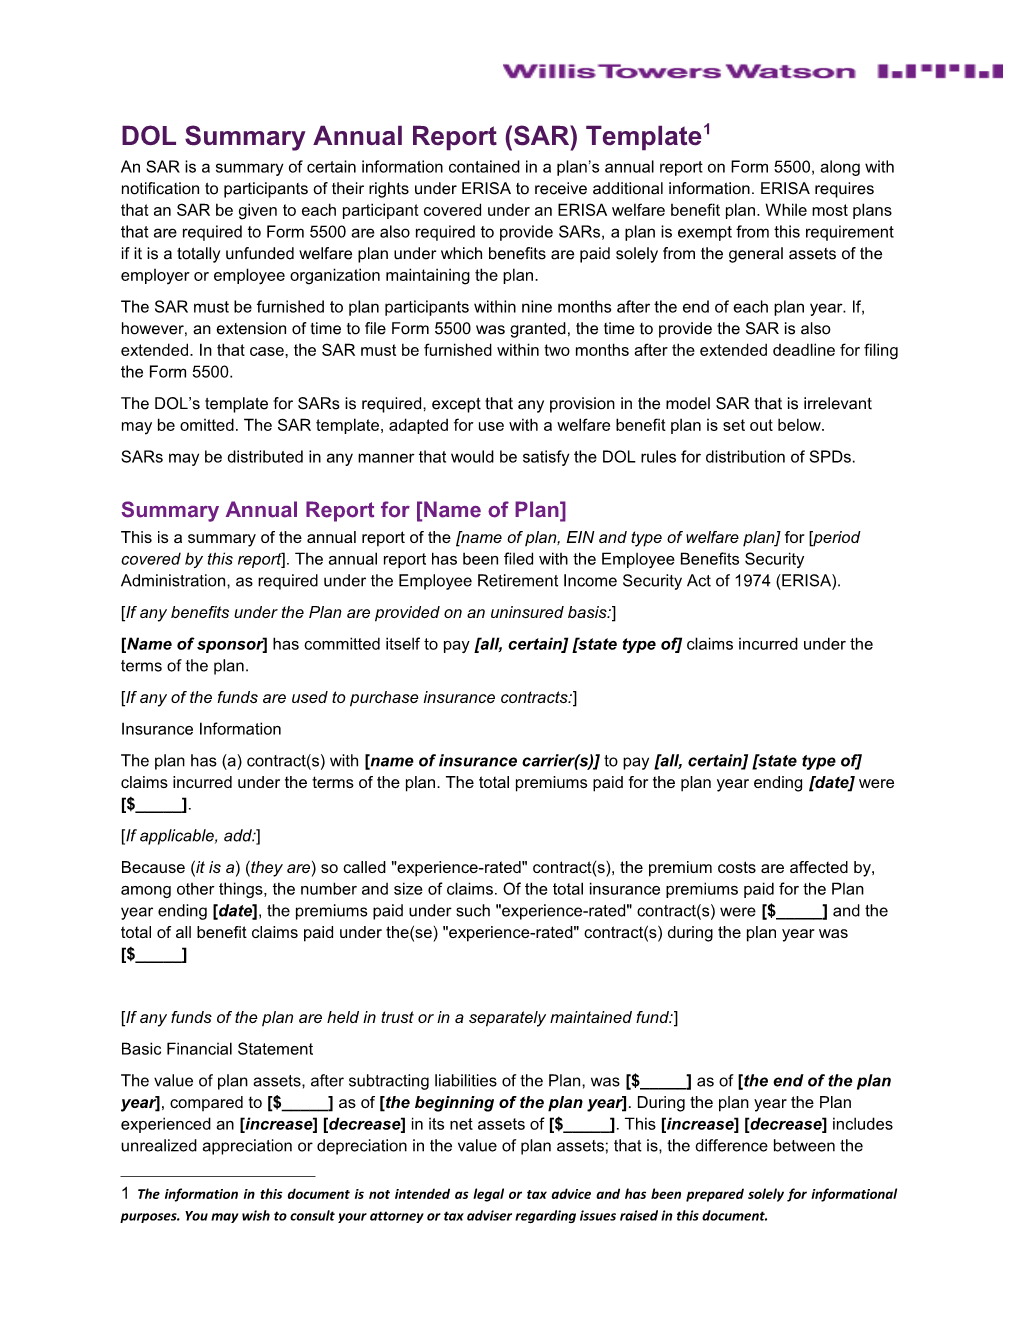 DOL Summary Annual Report (SAR) Template 1